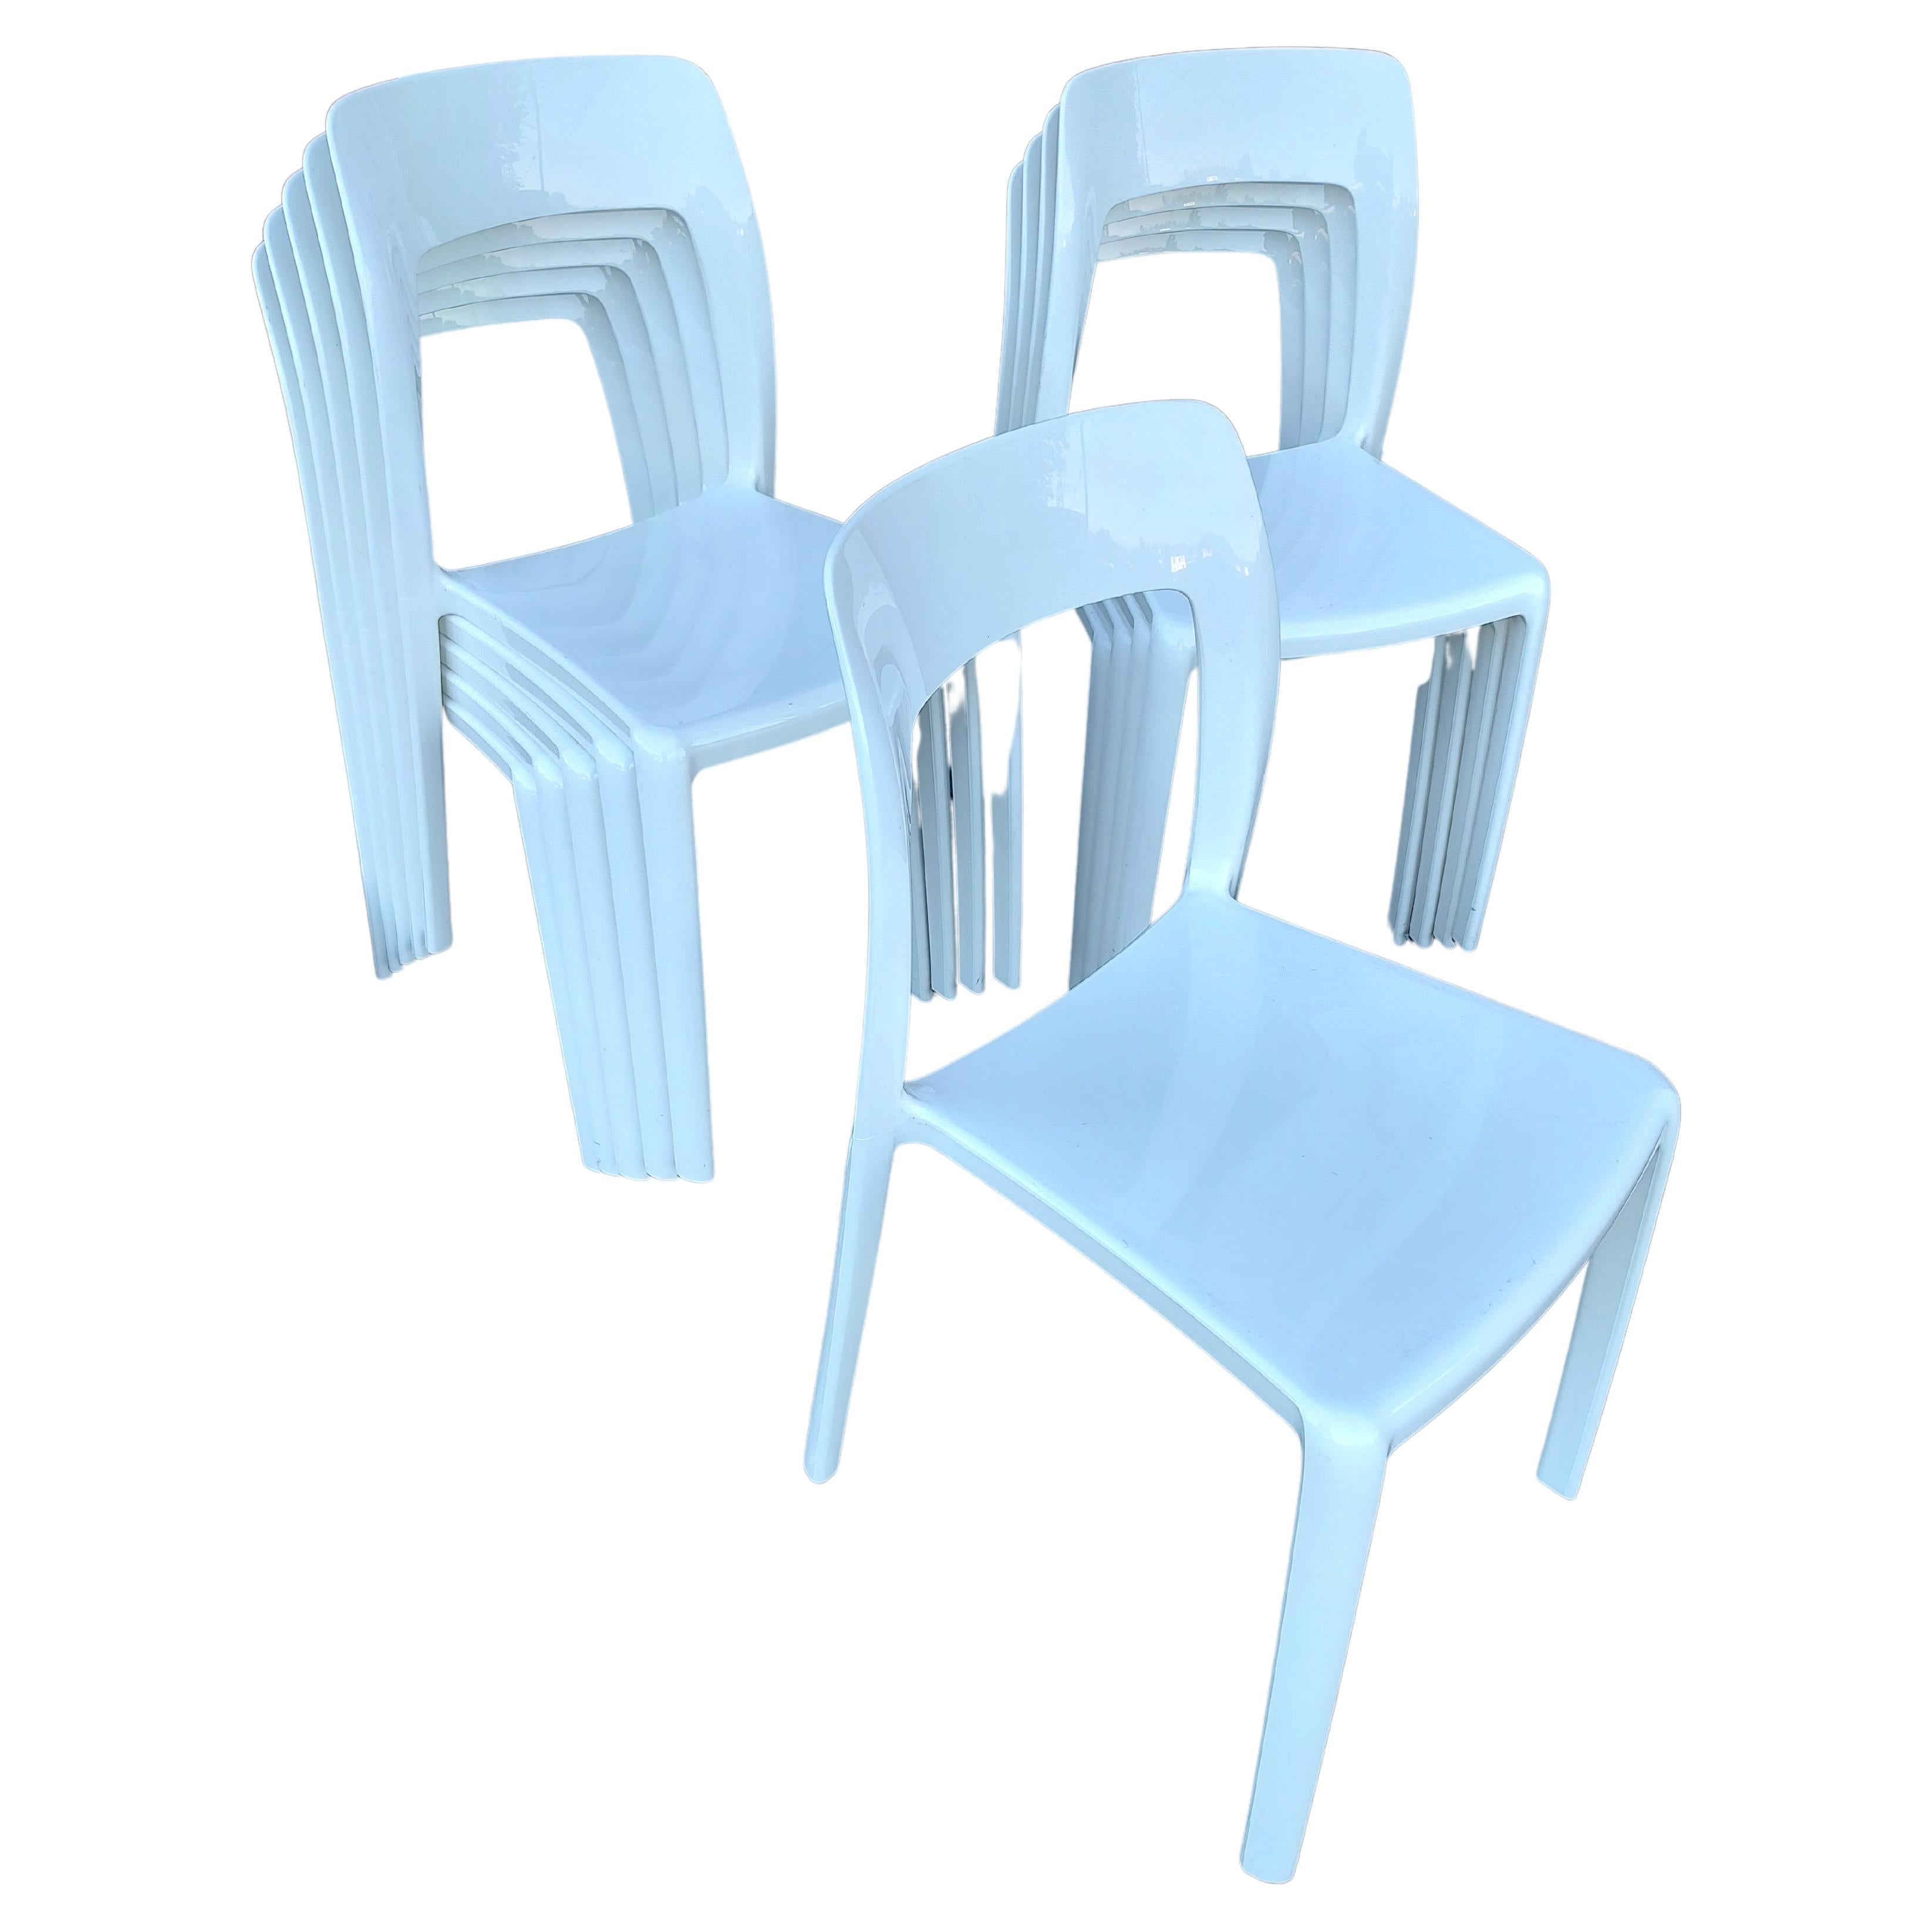 10 Mid Century Modern Stacking Chairs by AIR in White 